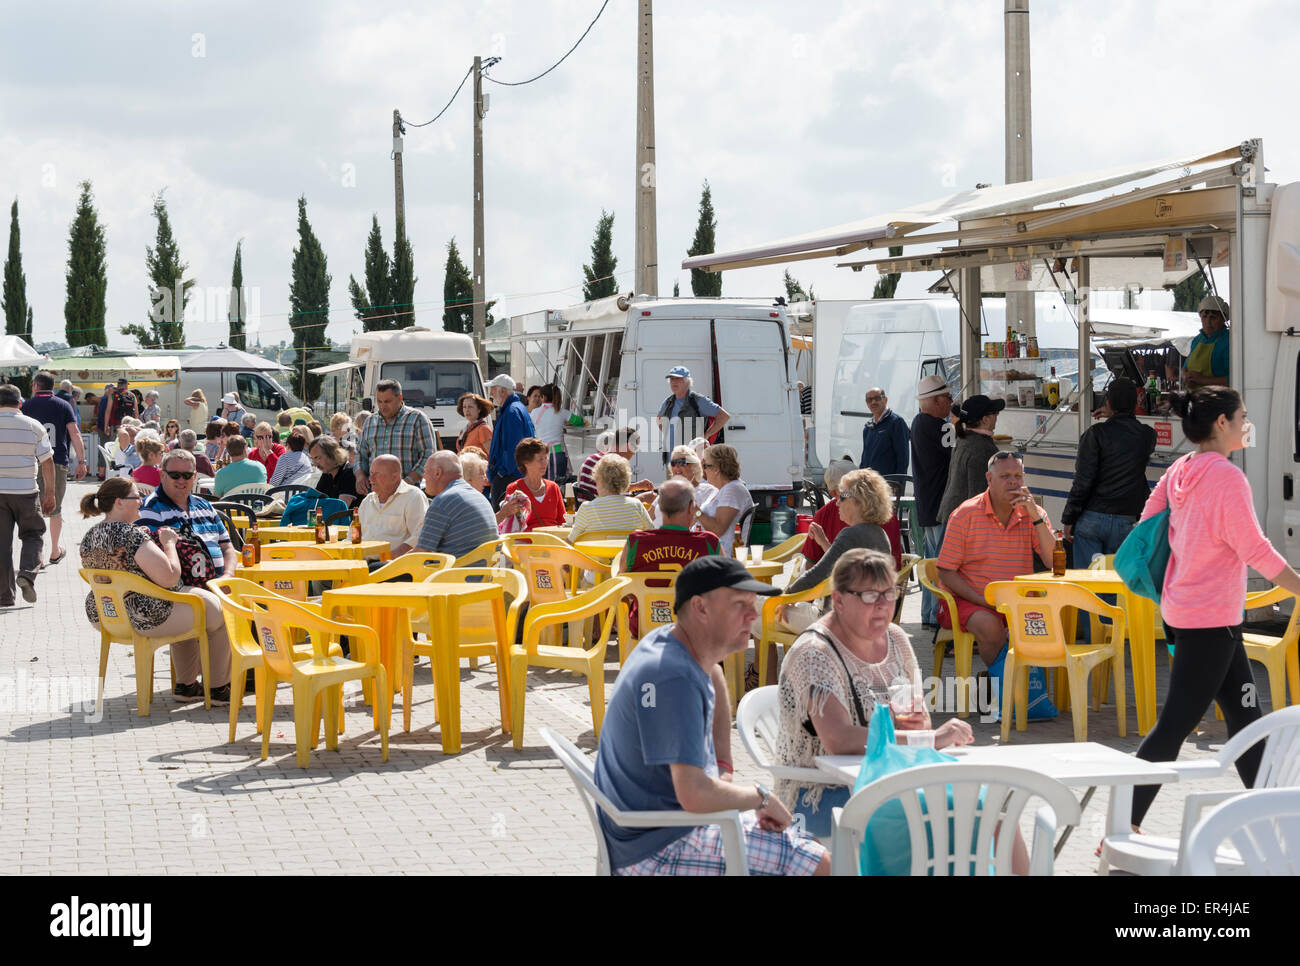 LOULE,PORTUGAL - APRIL 22: people enjoy their drinks and food on the teracce  at the market on April 22, 2015 in Loule, Portugal Stock Photo